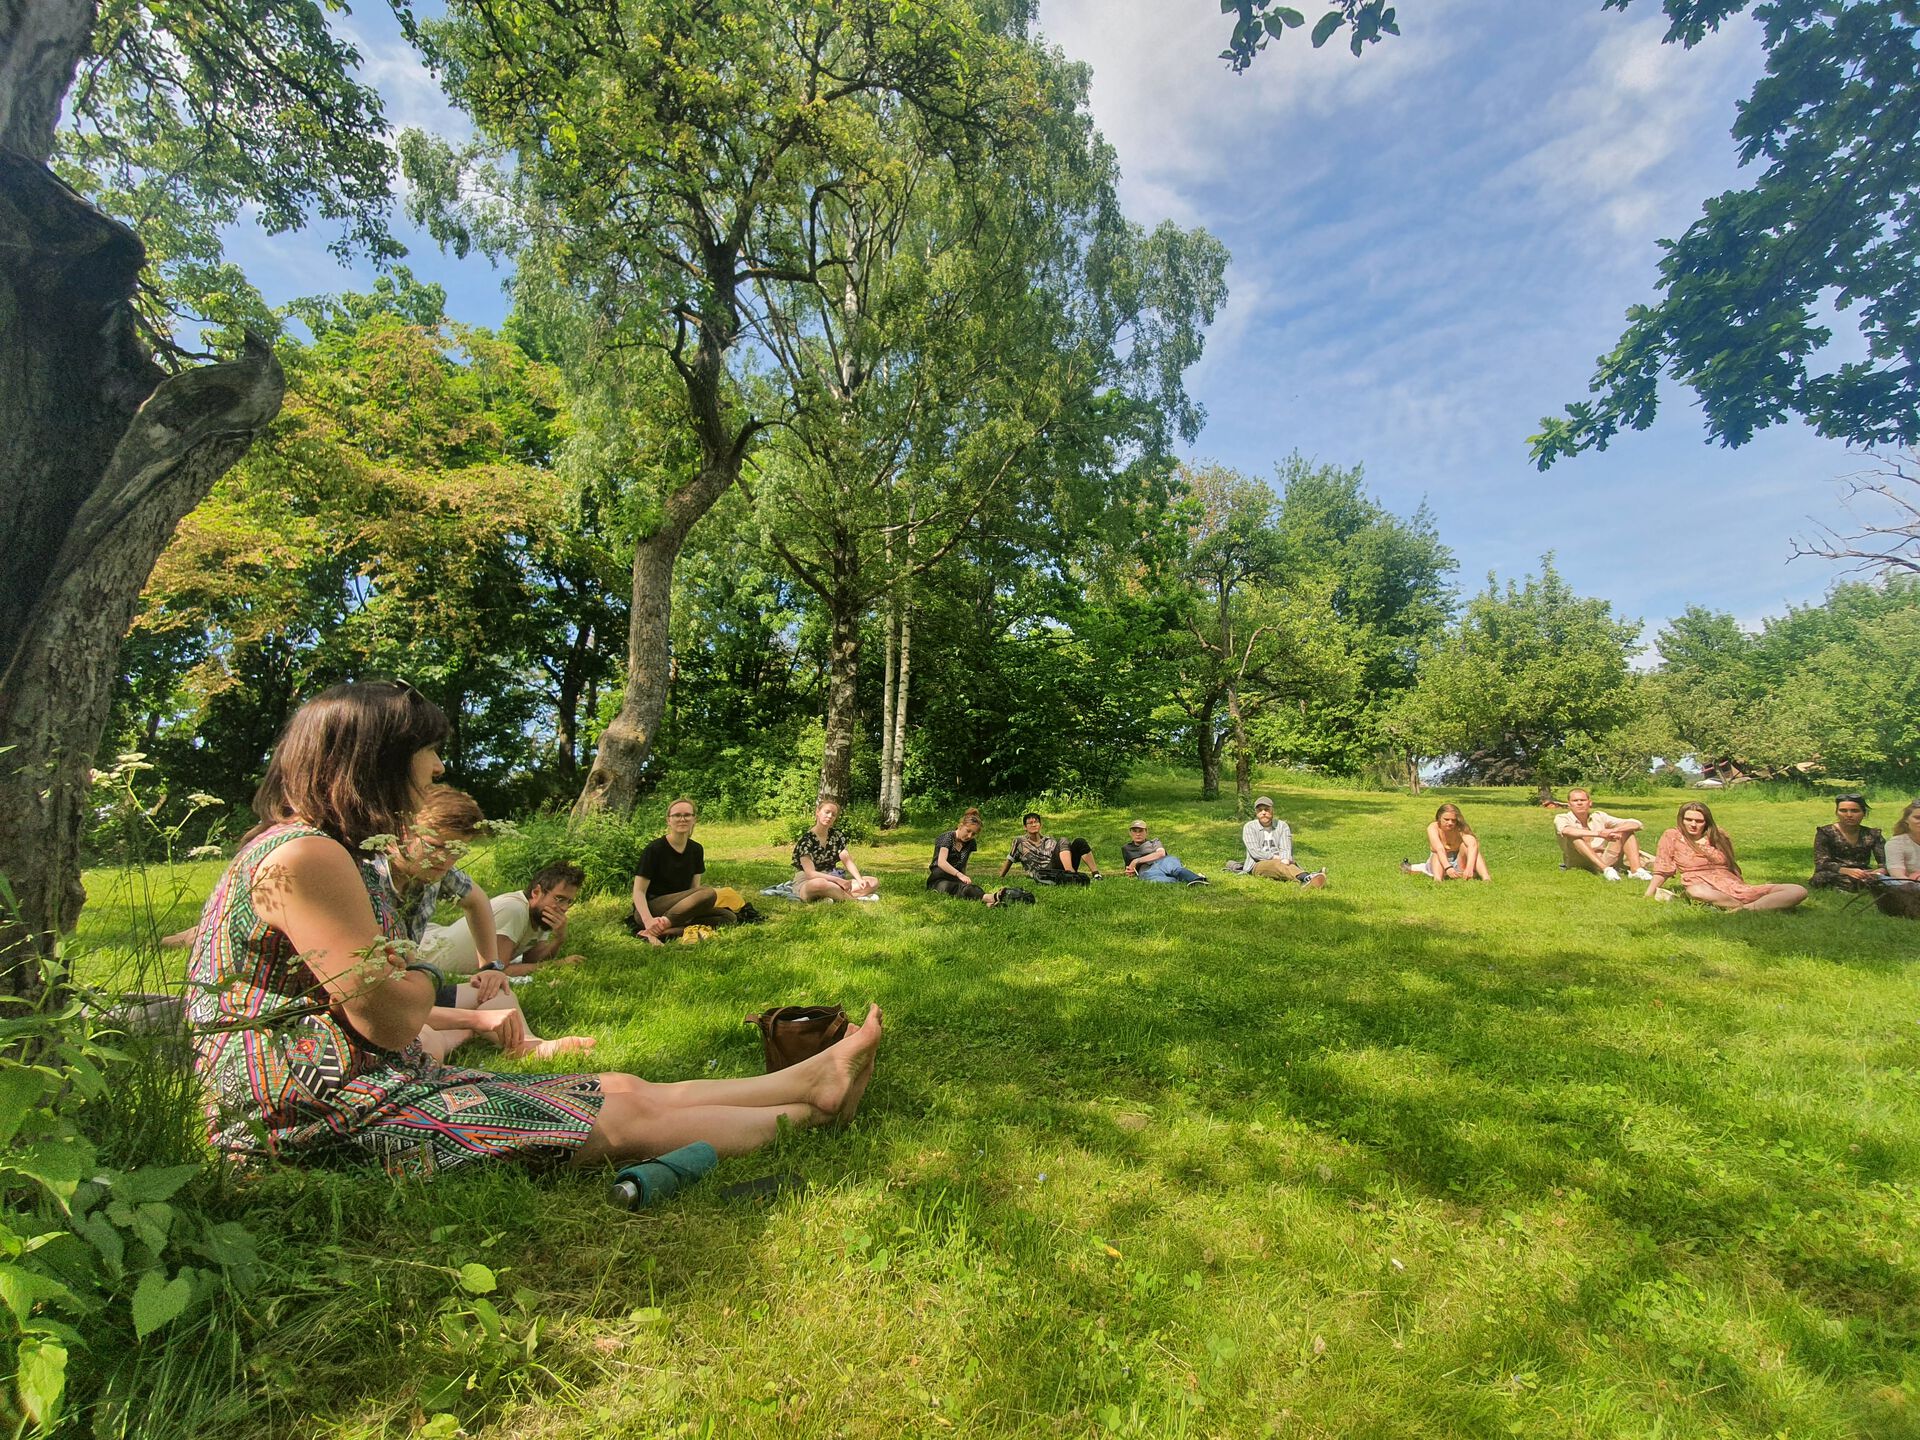 Picture of students meditating in a field of green grass. Lush, green trees in the background. 